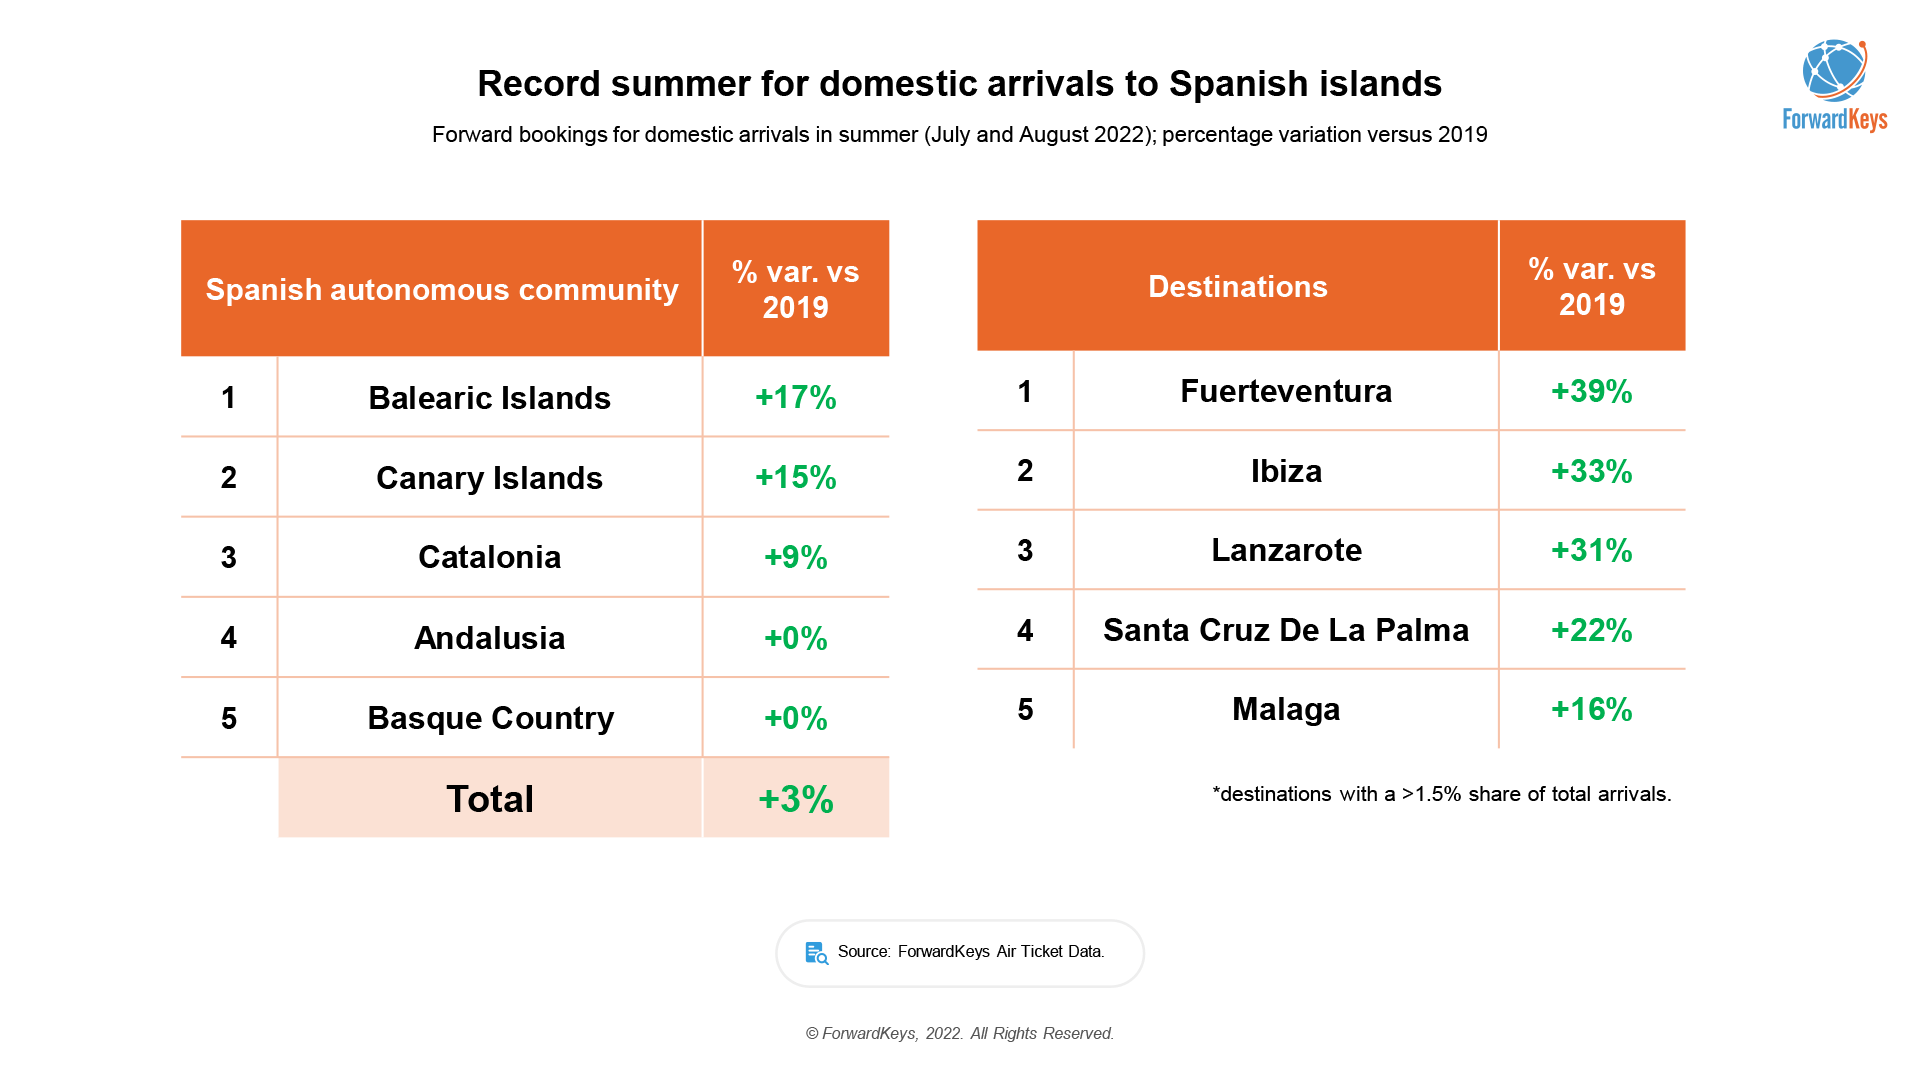 Record summer for domestic arrivals to Spanish Islands in 2022